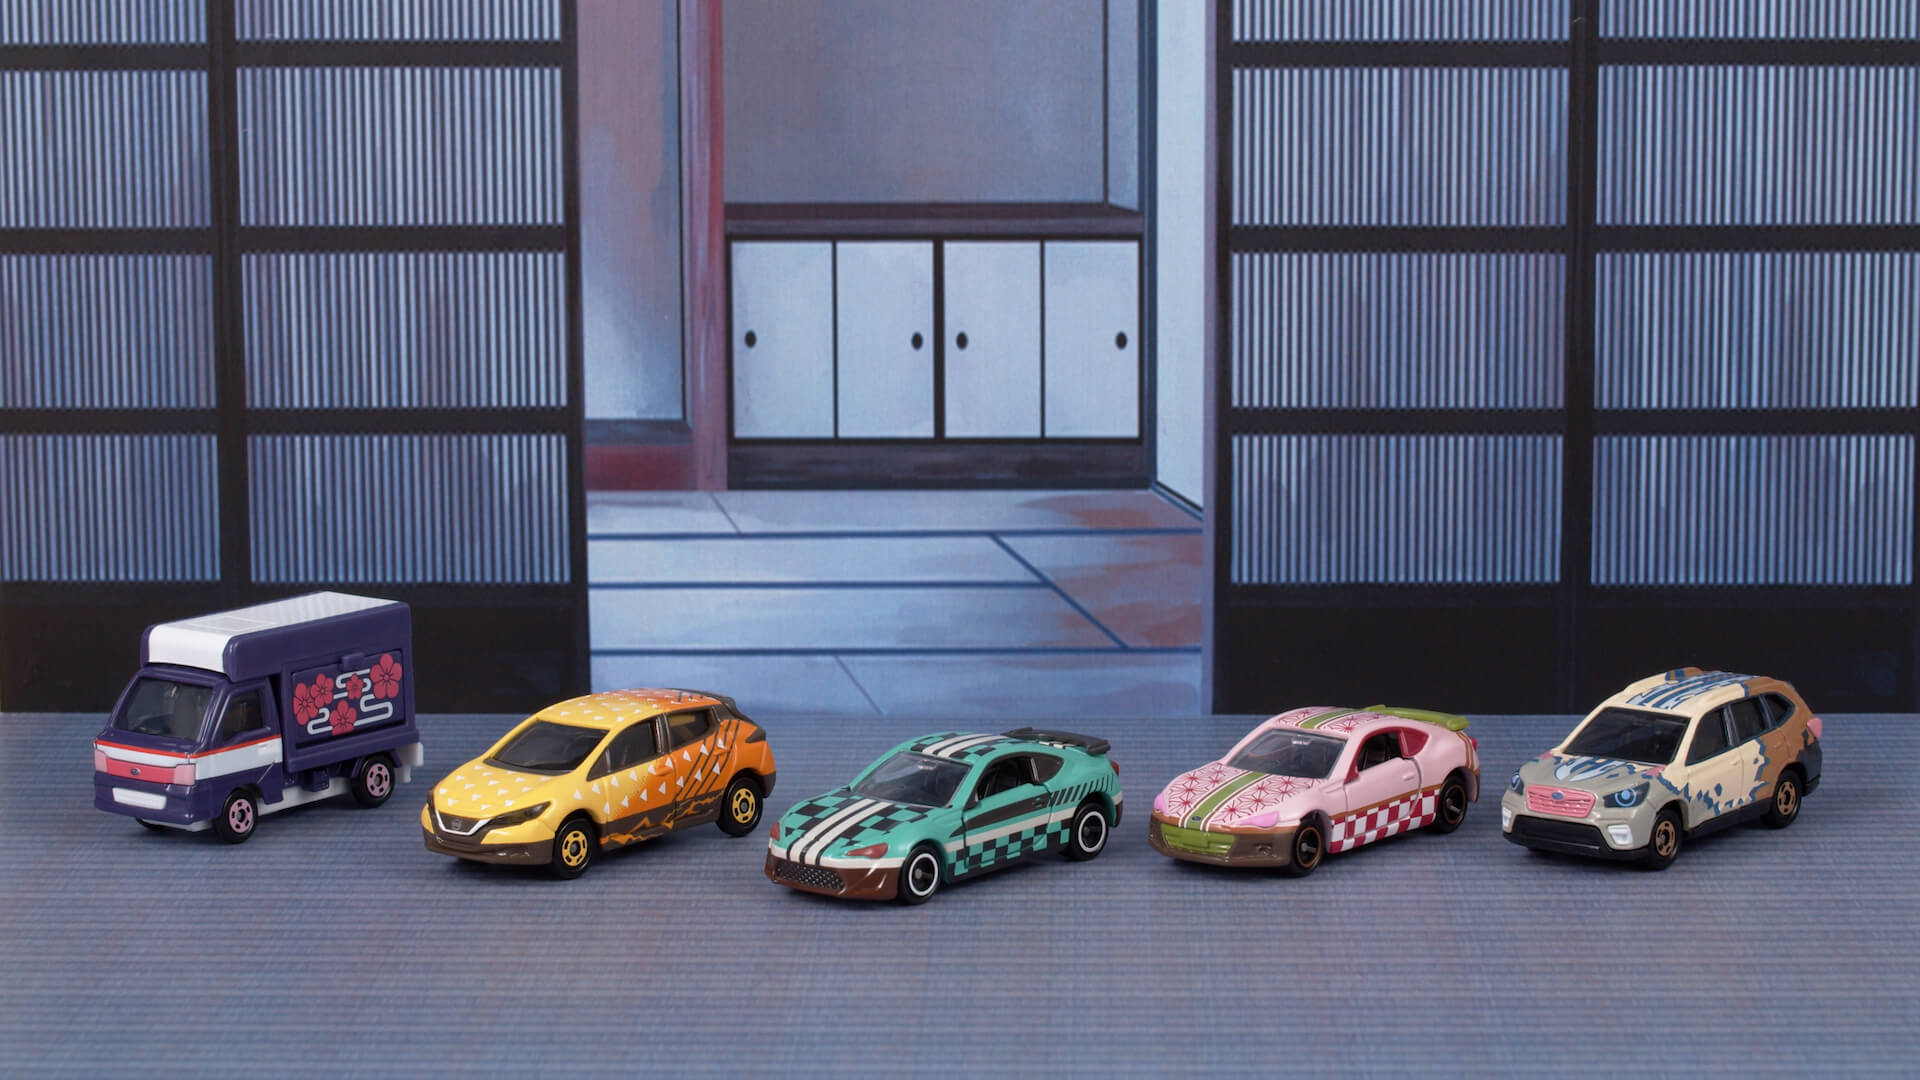 The Cast of Demon Slayer Become Toy Cars Courtesy of Tomica